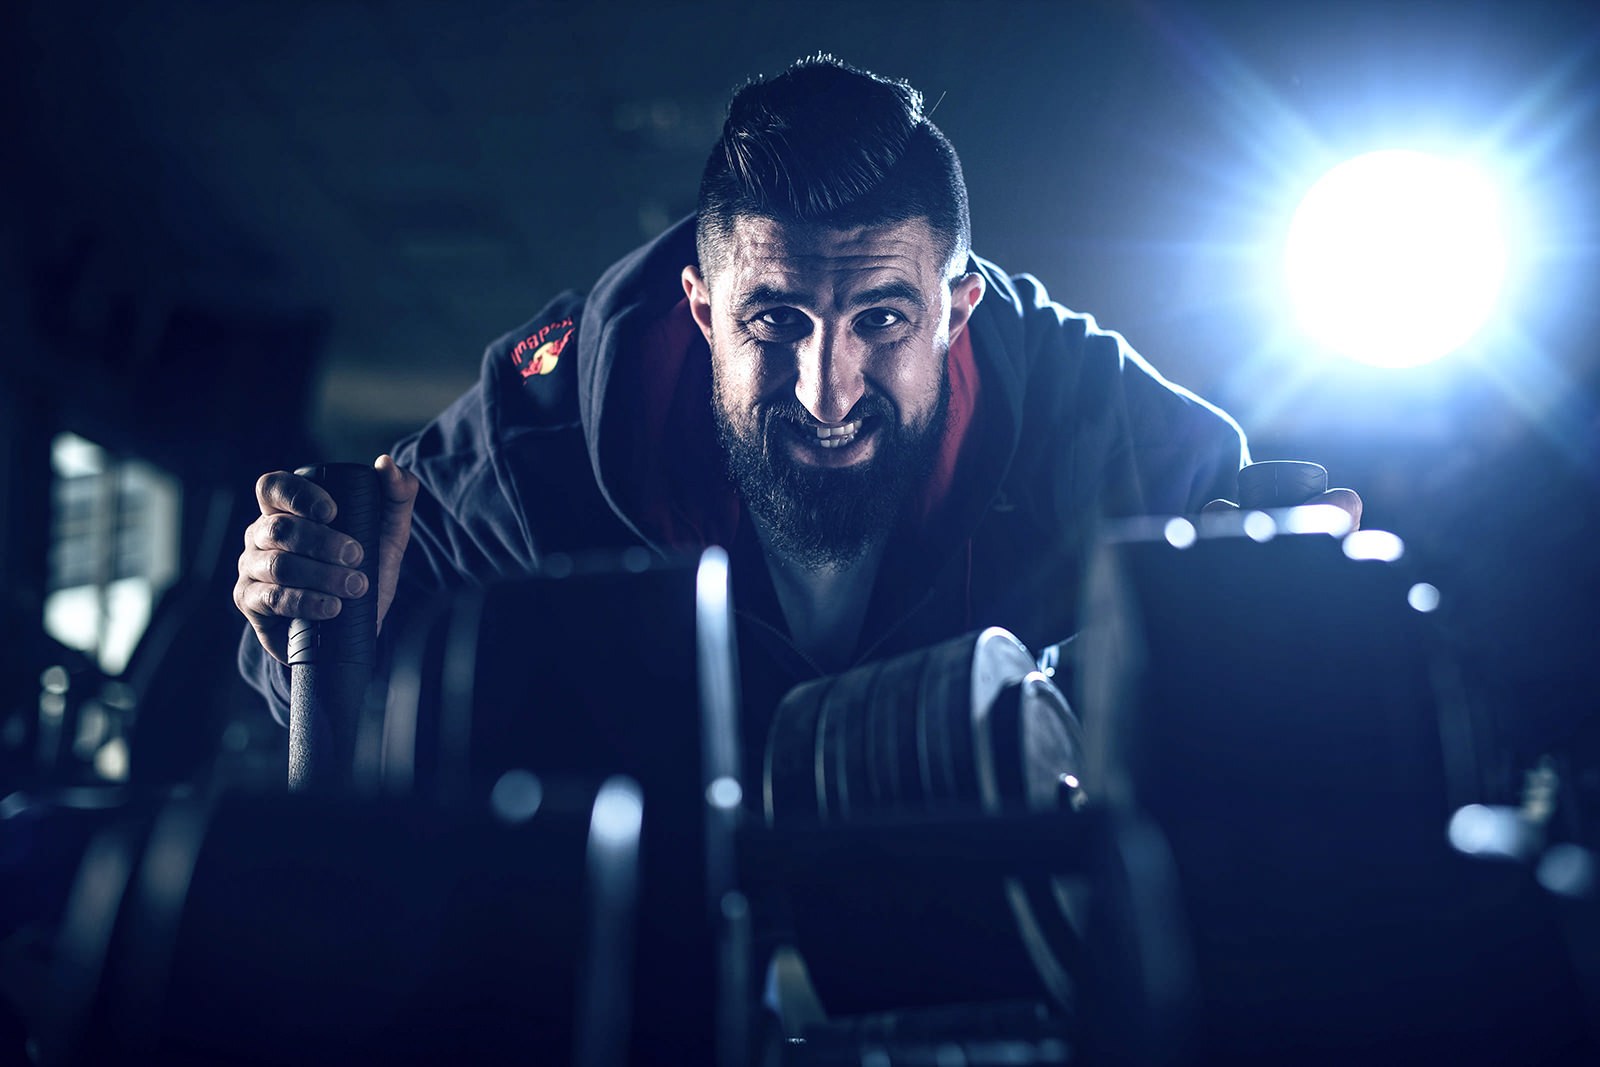 Florin Vlaicu posing during the photoshoot in Bucharest, Romania on March, 11th, 2018 // Mihai Stetcu/Red Bull Content Pool // AP-1V1Y9FW6N2111 // Usage for editorial use only //